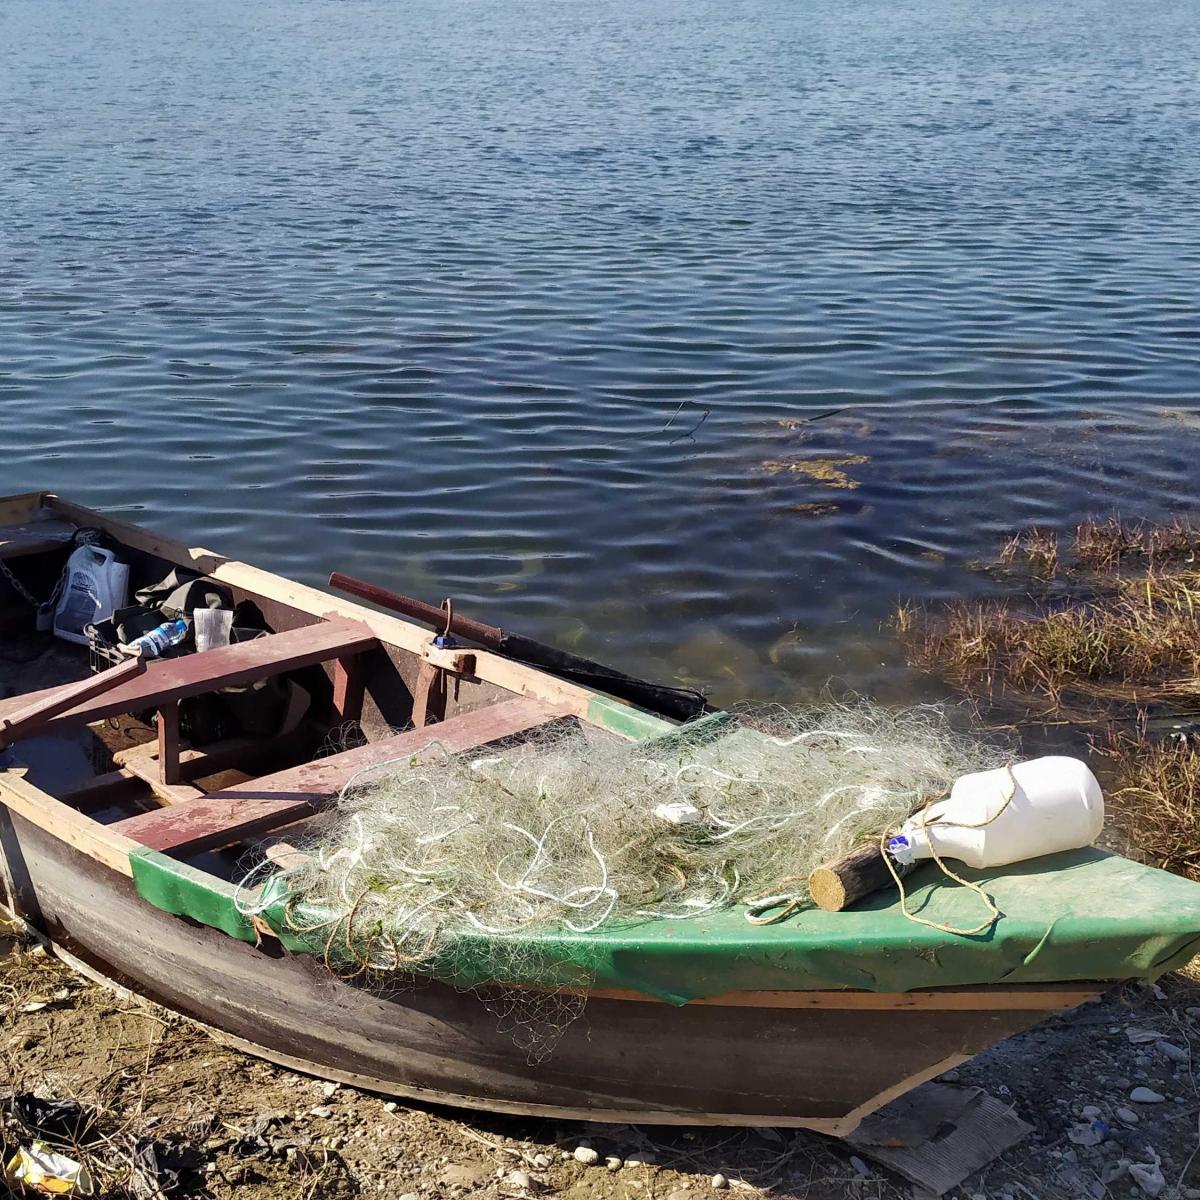 With support from USAID, Arkan was able to purchase a new boat and fishing equipment to restart his business.